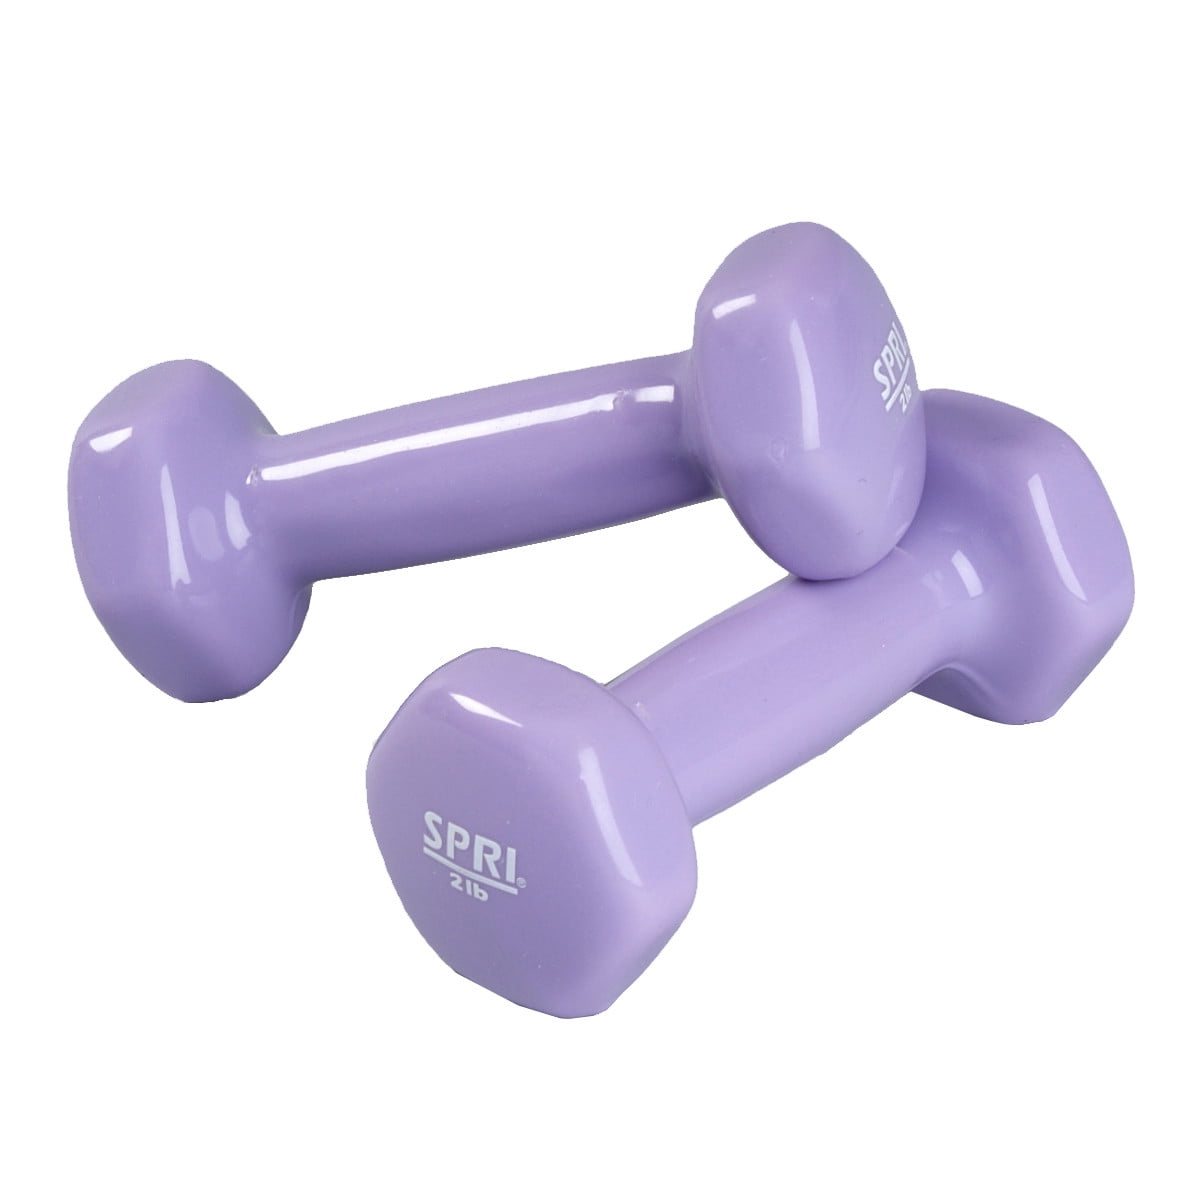 Pink SPRI Dumbbells Deluxe Vinyl Coated Hand Weights All-Purpose Color Coded Dumbbell for Strength Training Set of 2 GAIAM DB-1 Available in 1-10 Pounds, 12, 15, 18 & 20 Pounds 1-Pound